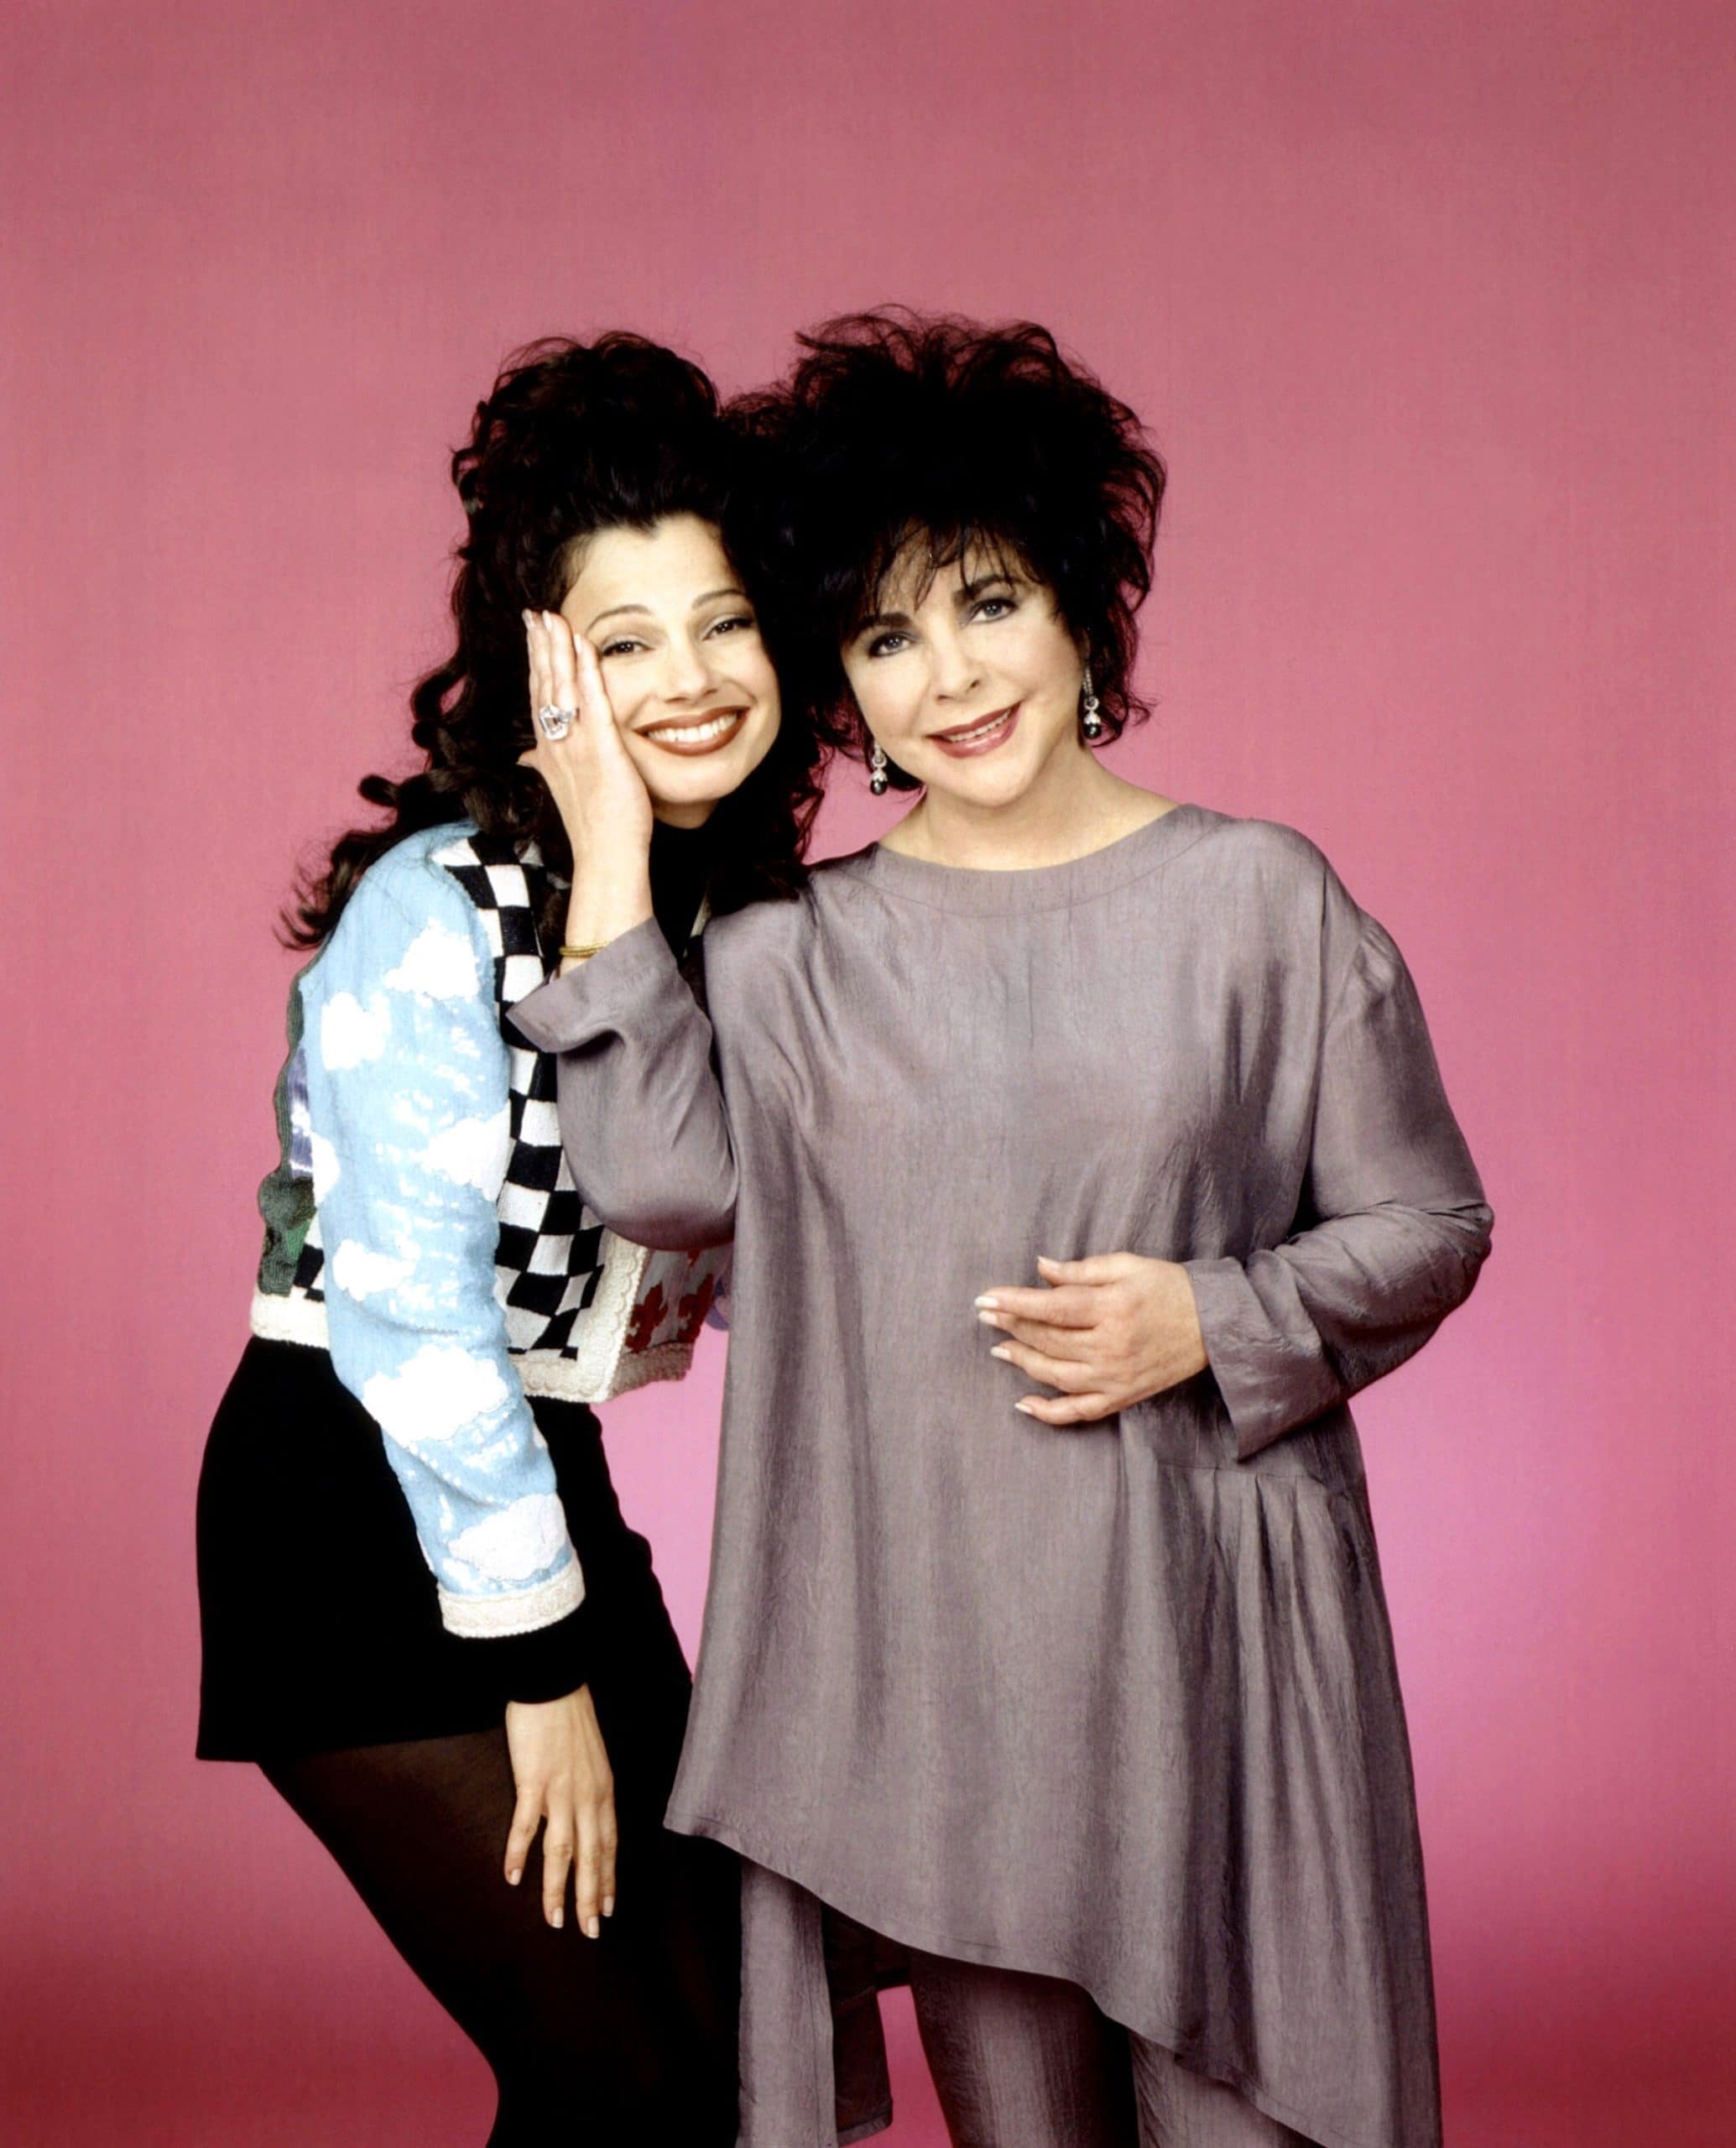 THE NANNY, from left, Fran Drescher, Elizabeth Taylor, 'Where's the Pearls?,' 